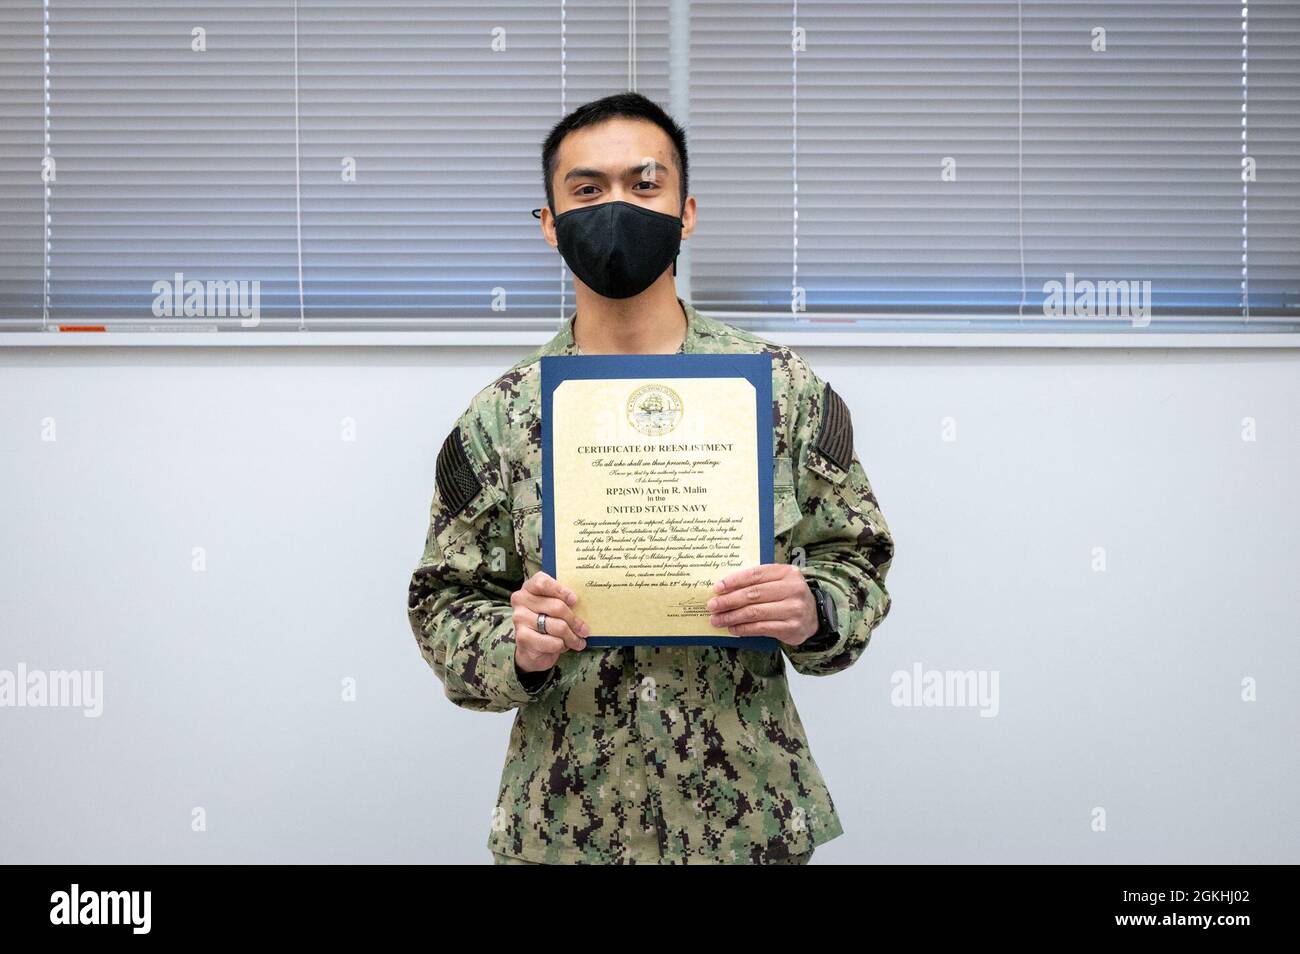 WASHINGTON, DC (April 23, 2021) – Religious Program Specialist 2nd Class Arvin Malin poses with his certificate of enlistment during a ceremony held onboard Washington Navy Yard. Stock Photo